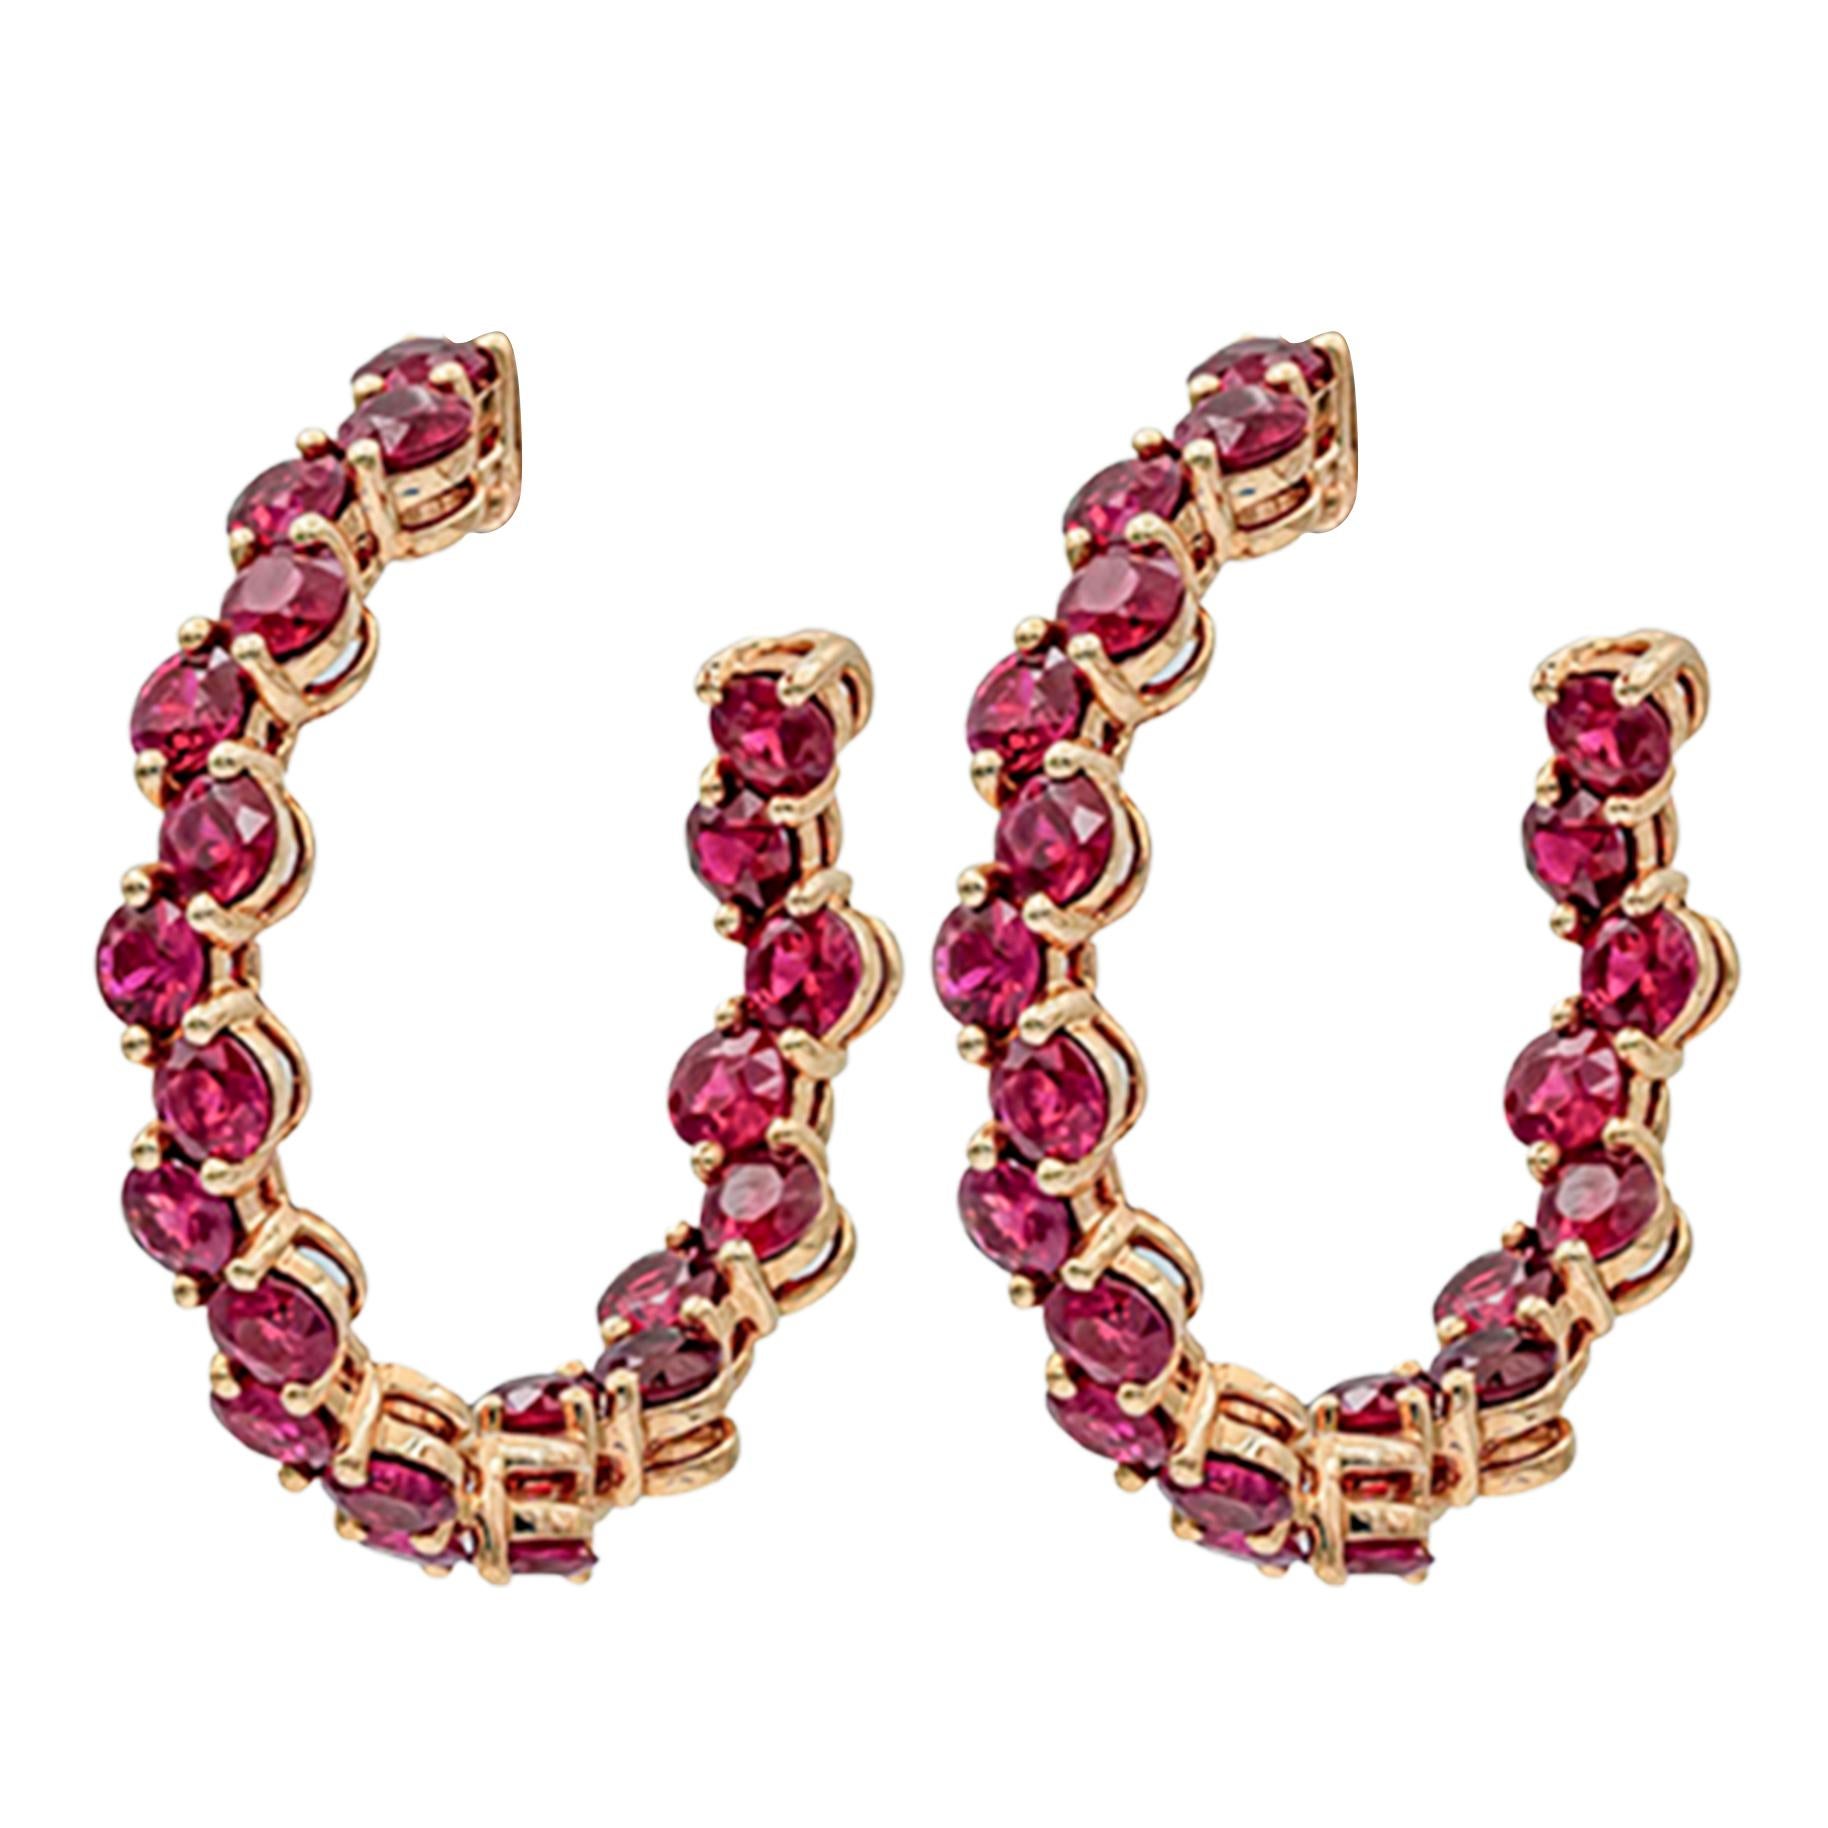 Contemporary Roman Malakov 8.11 Carats Total Brilliant Round Ruby Wave Design Hoop Earrings For Sale